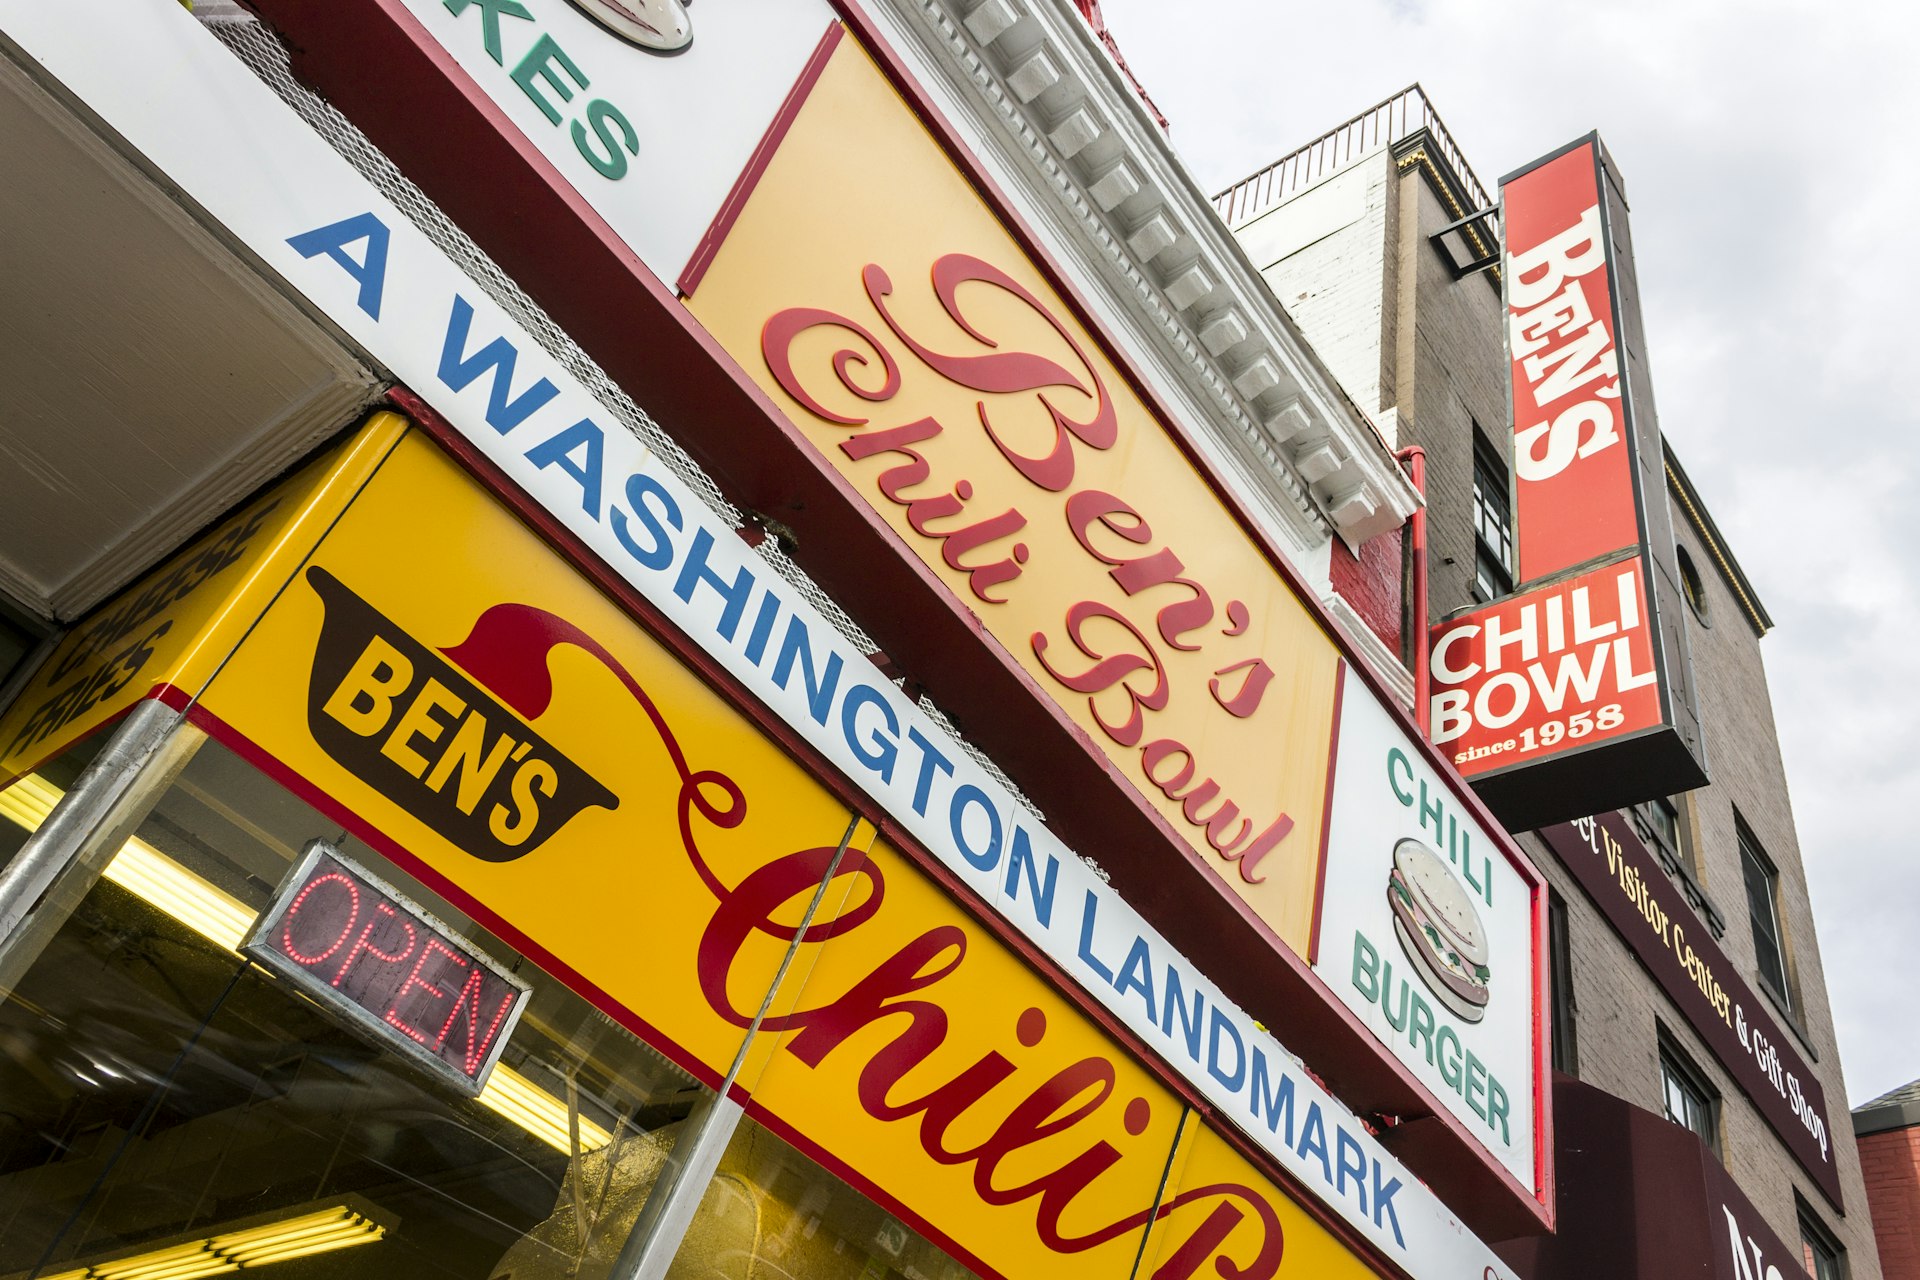 The exterior of Ben’s Chili Bowl, a landmark restaurant founded in 1958 on U Street, Shaw, Washington, DC, USAt